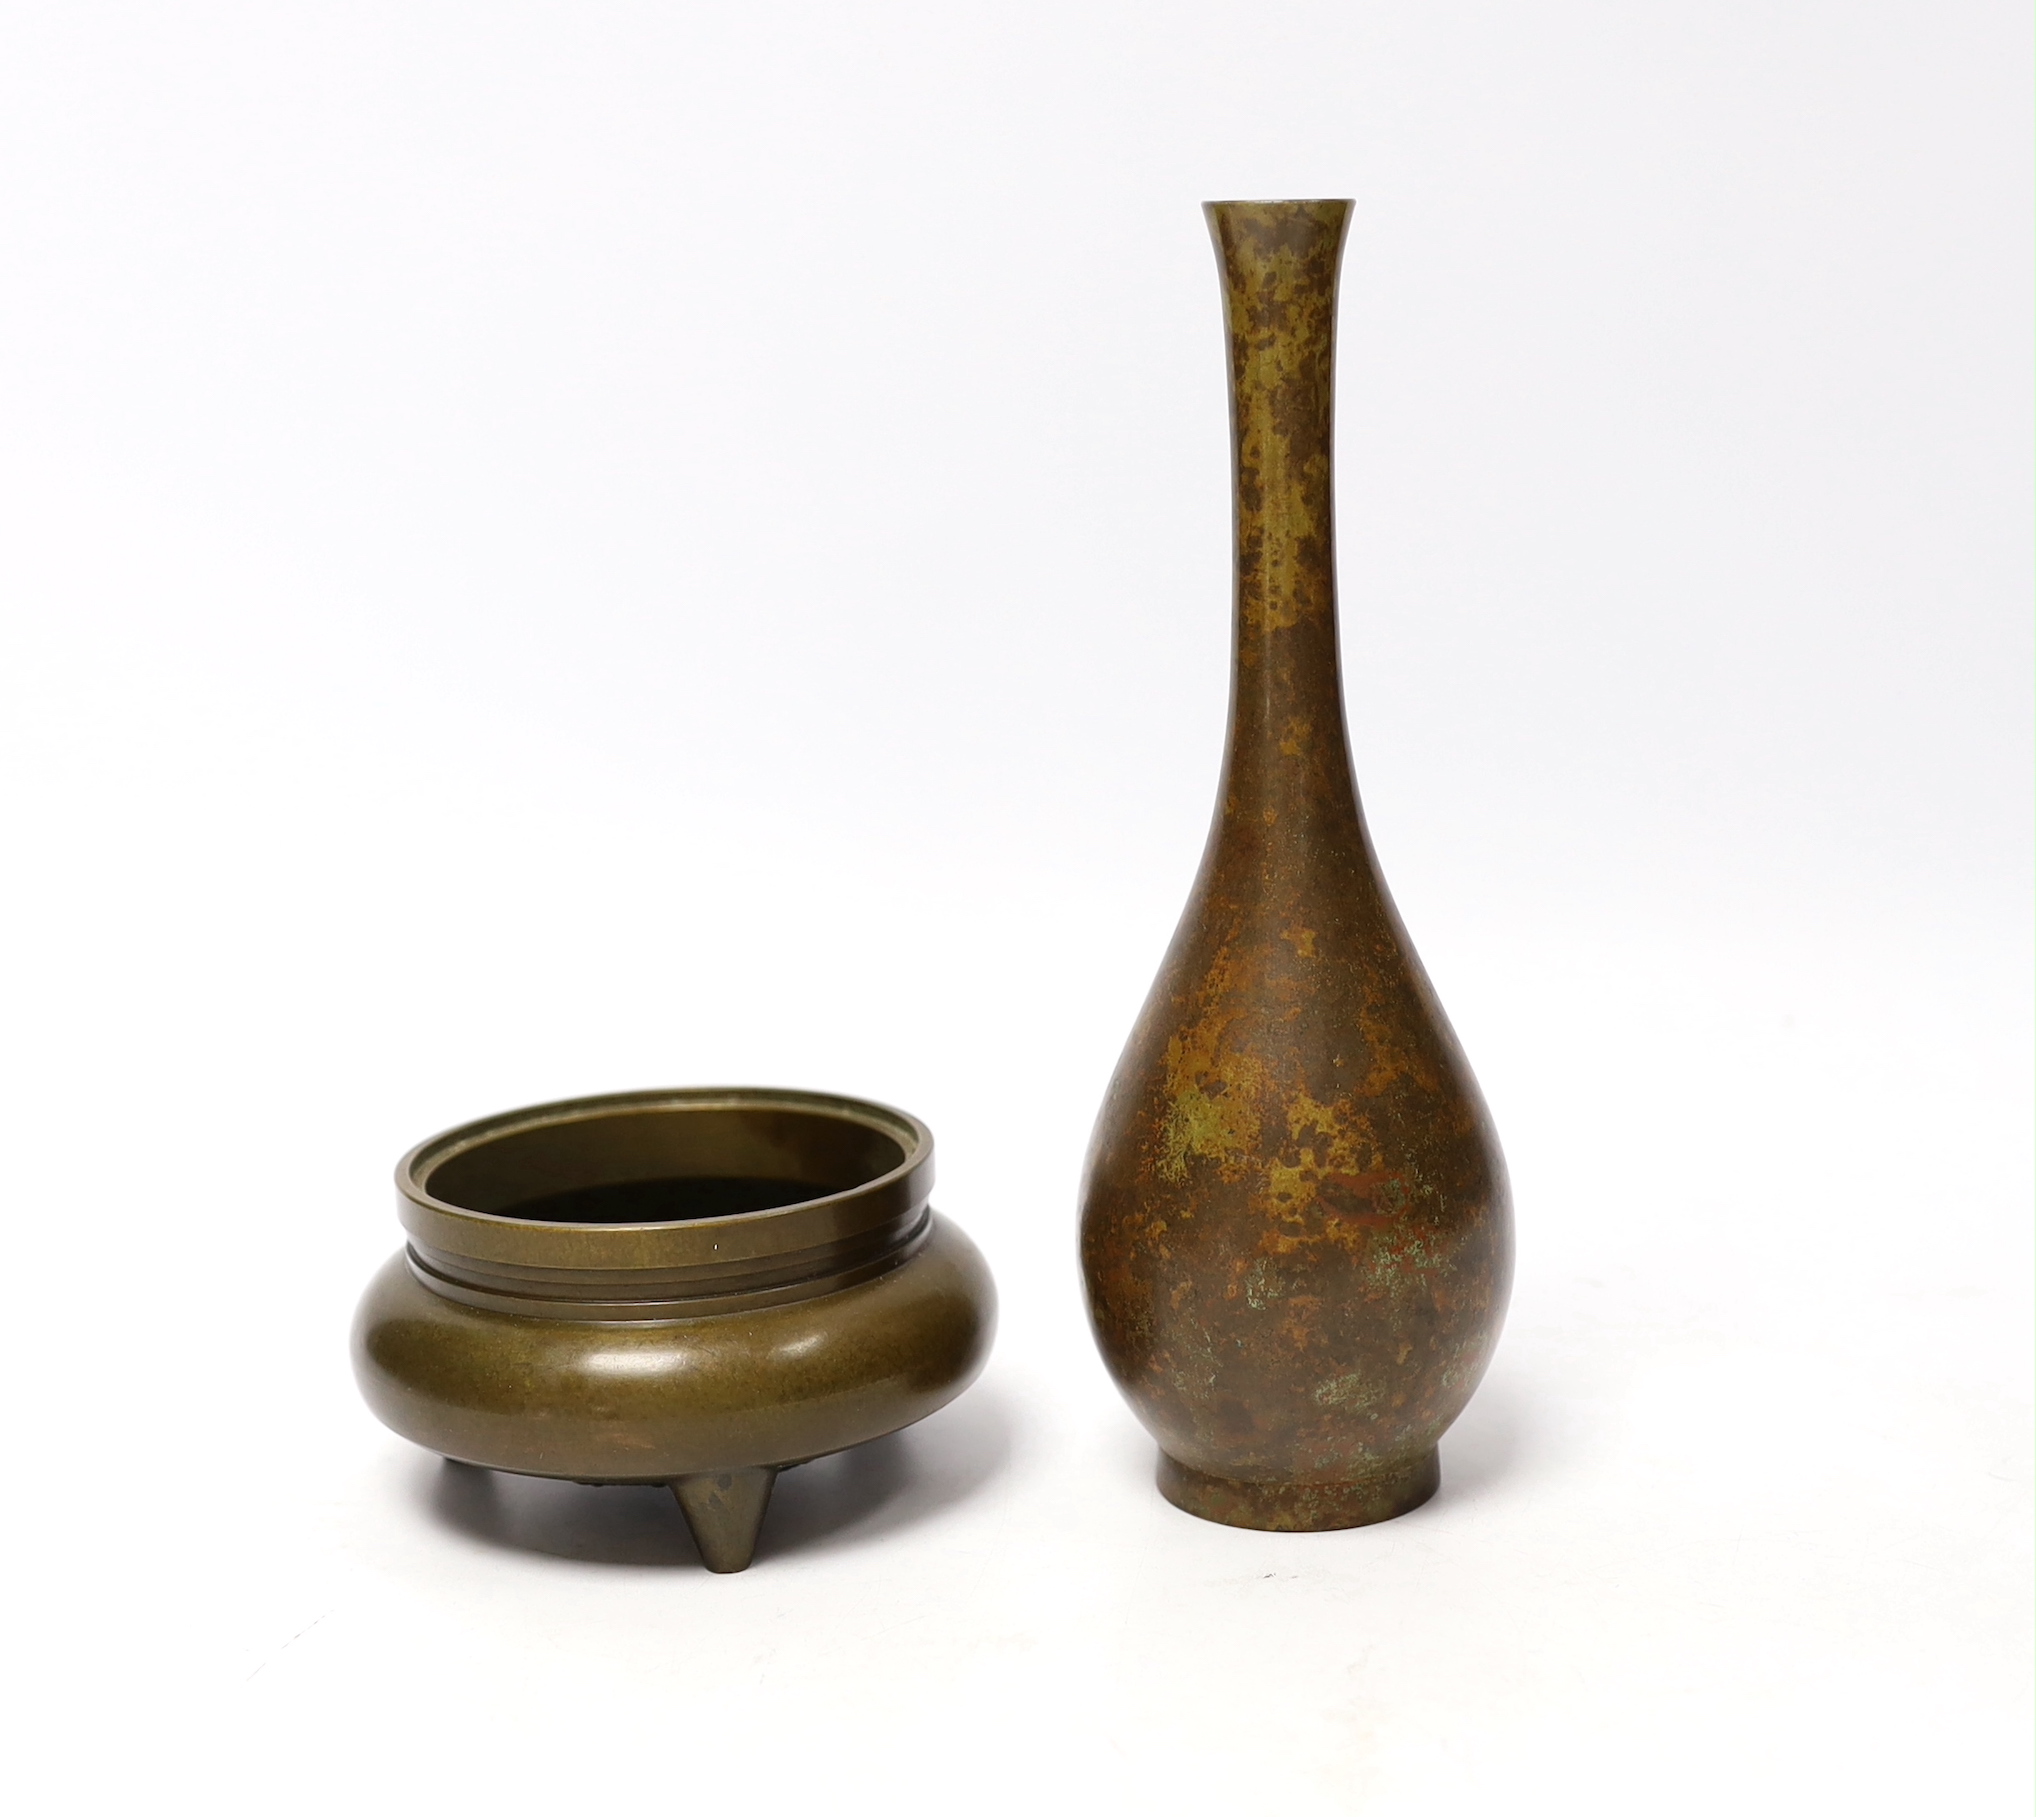 Two Chinese bronzes; a miniature censer and a vase, vase 18.5cm high                                                                                                                                                        